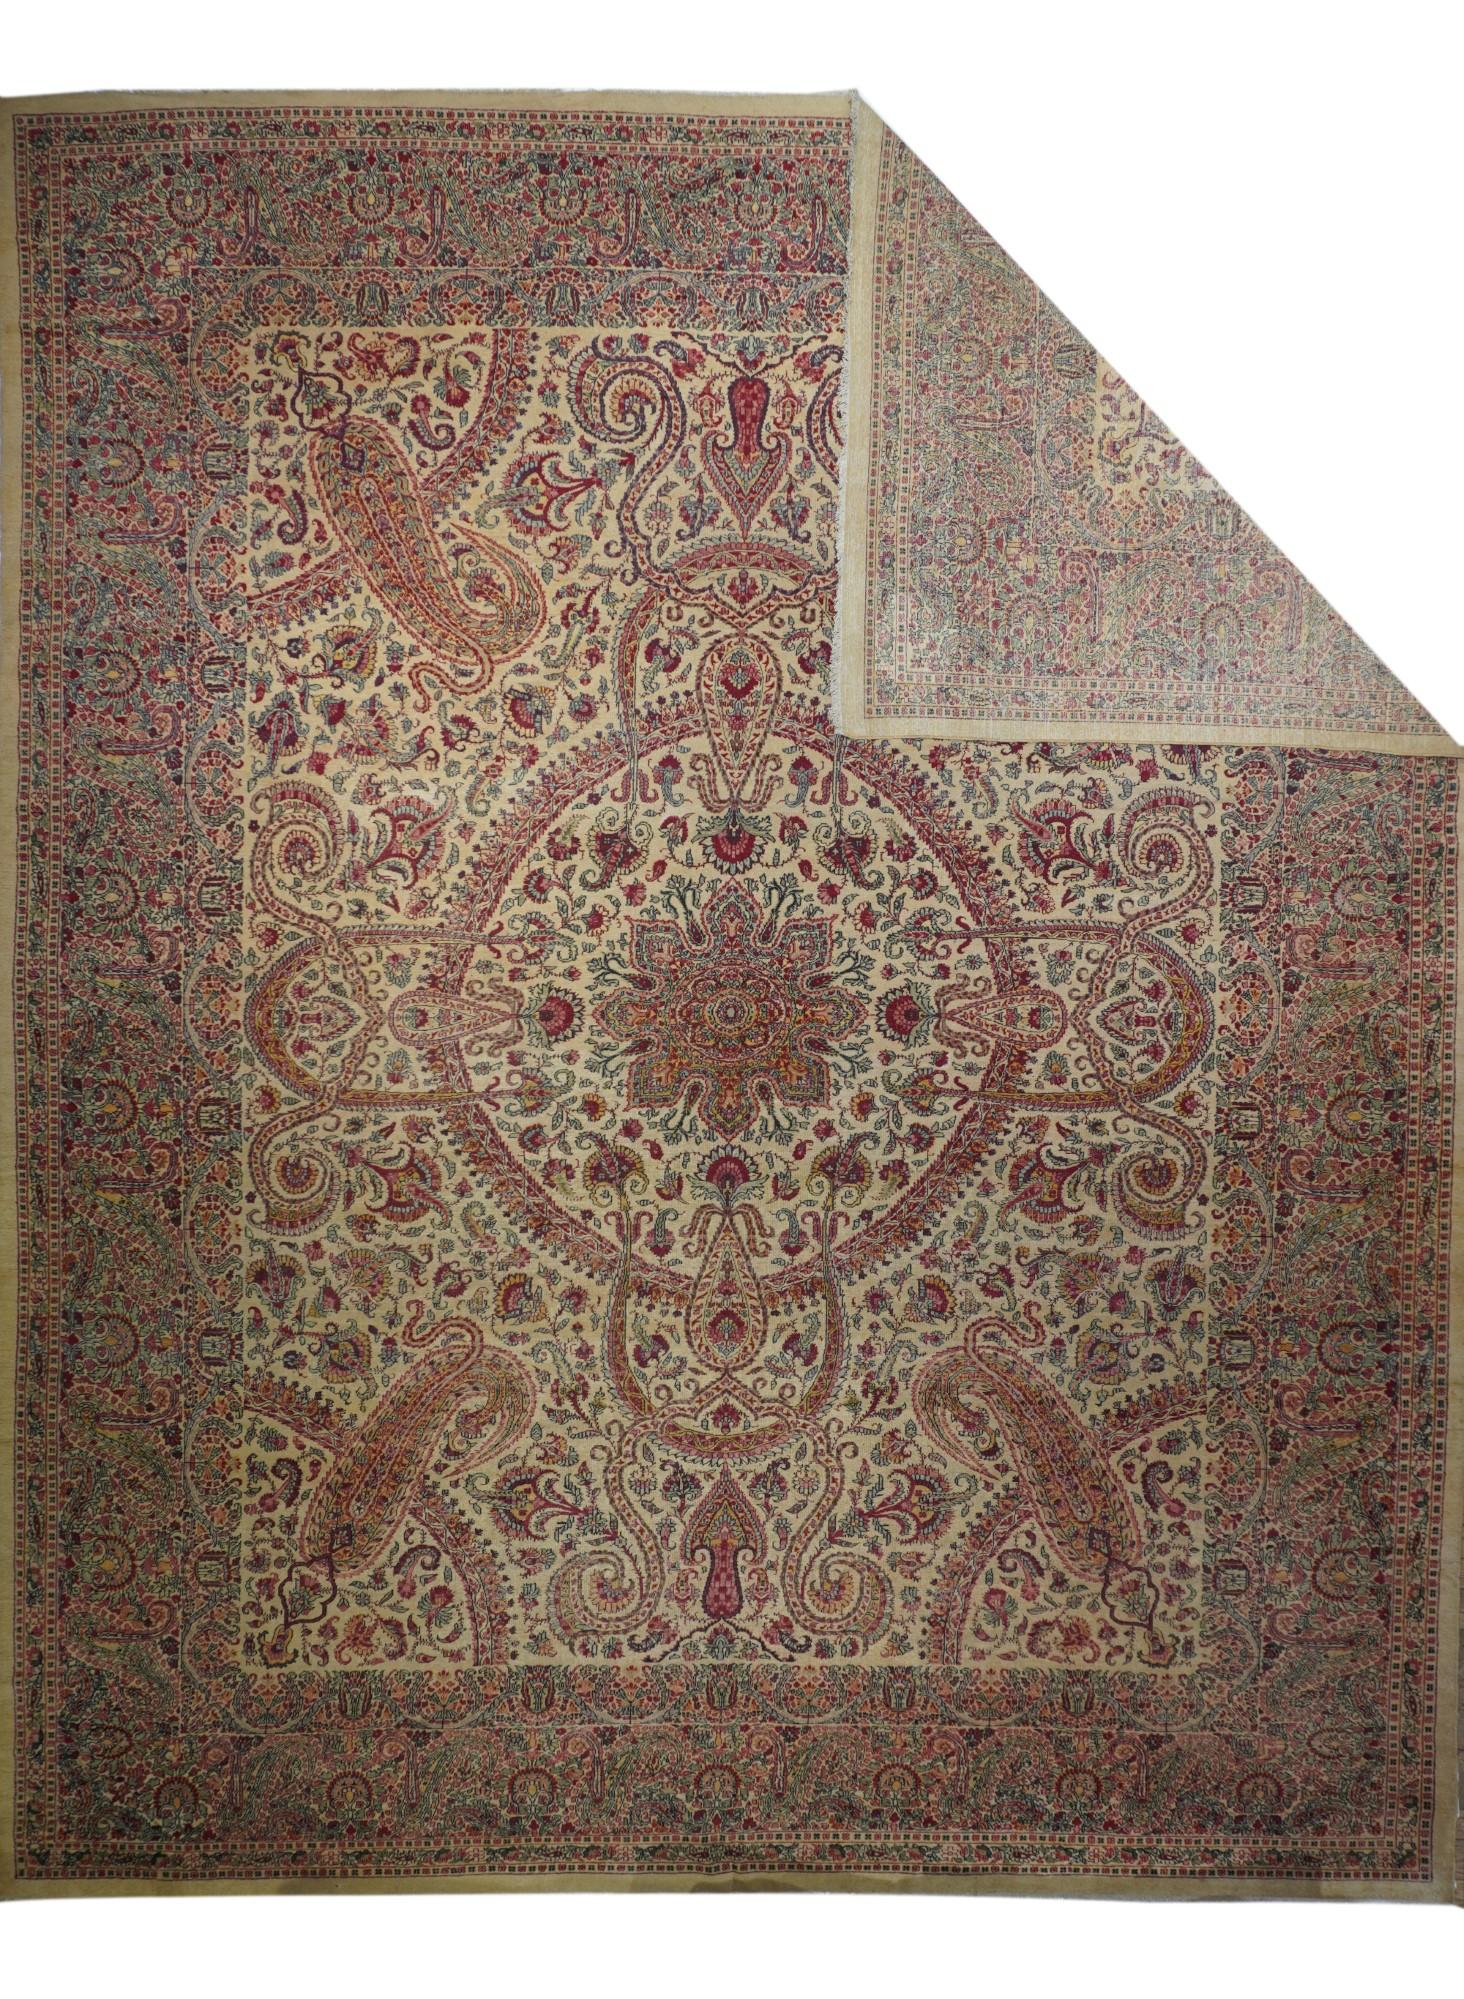 With a general warm gold tonality, this interwar west Anatolian carpet shows an open medallion with two layers of blossoming volutes and curled acanthus leaves, with en suite pendants, on an open field. Broad vase, volute and palmette main border.